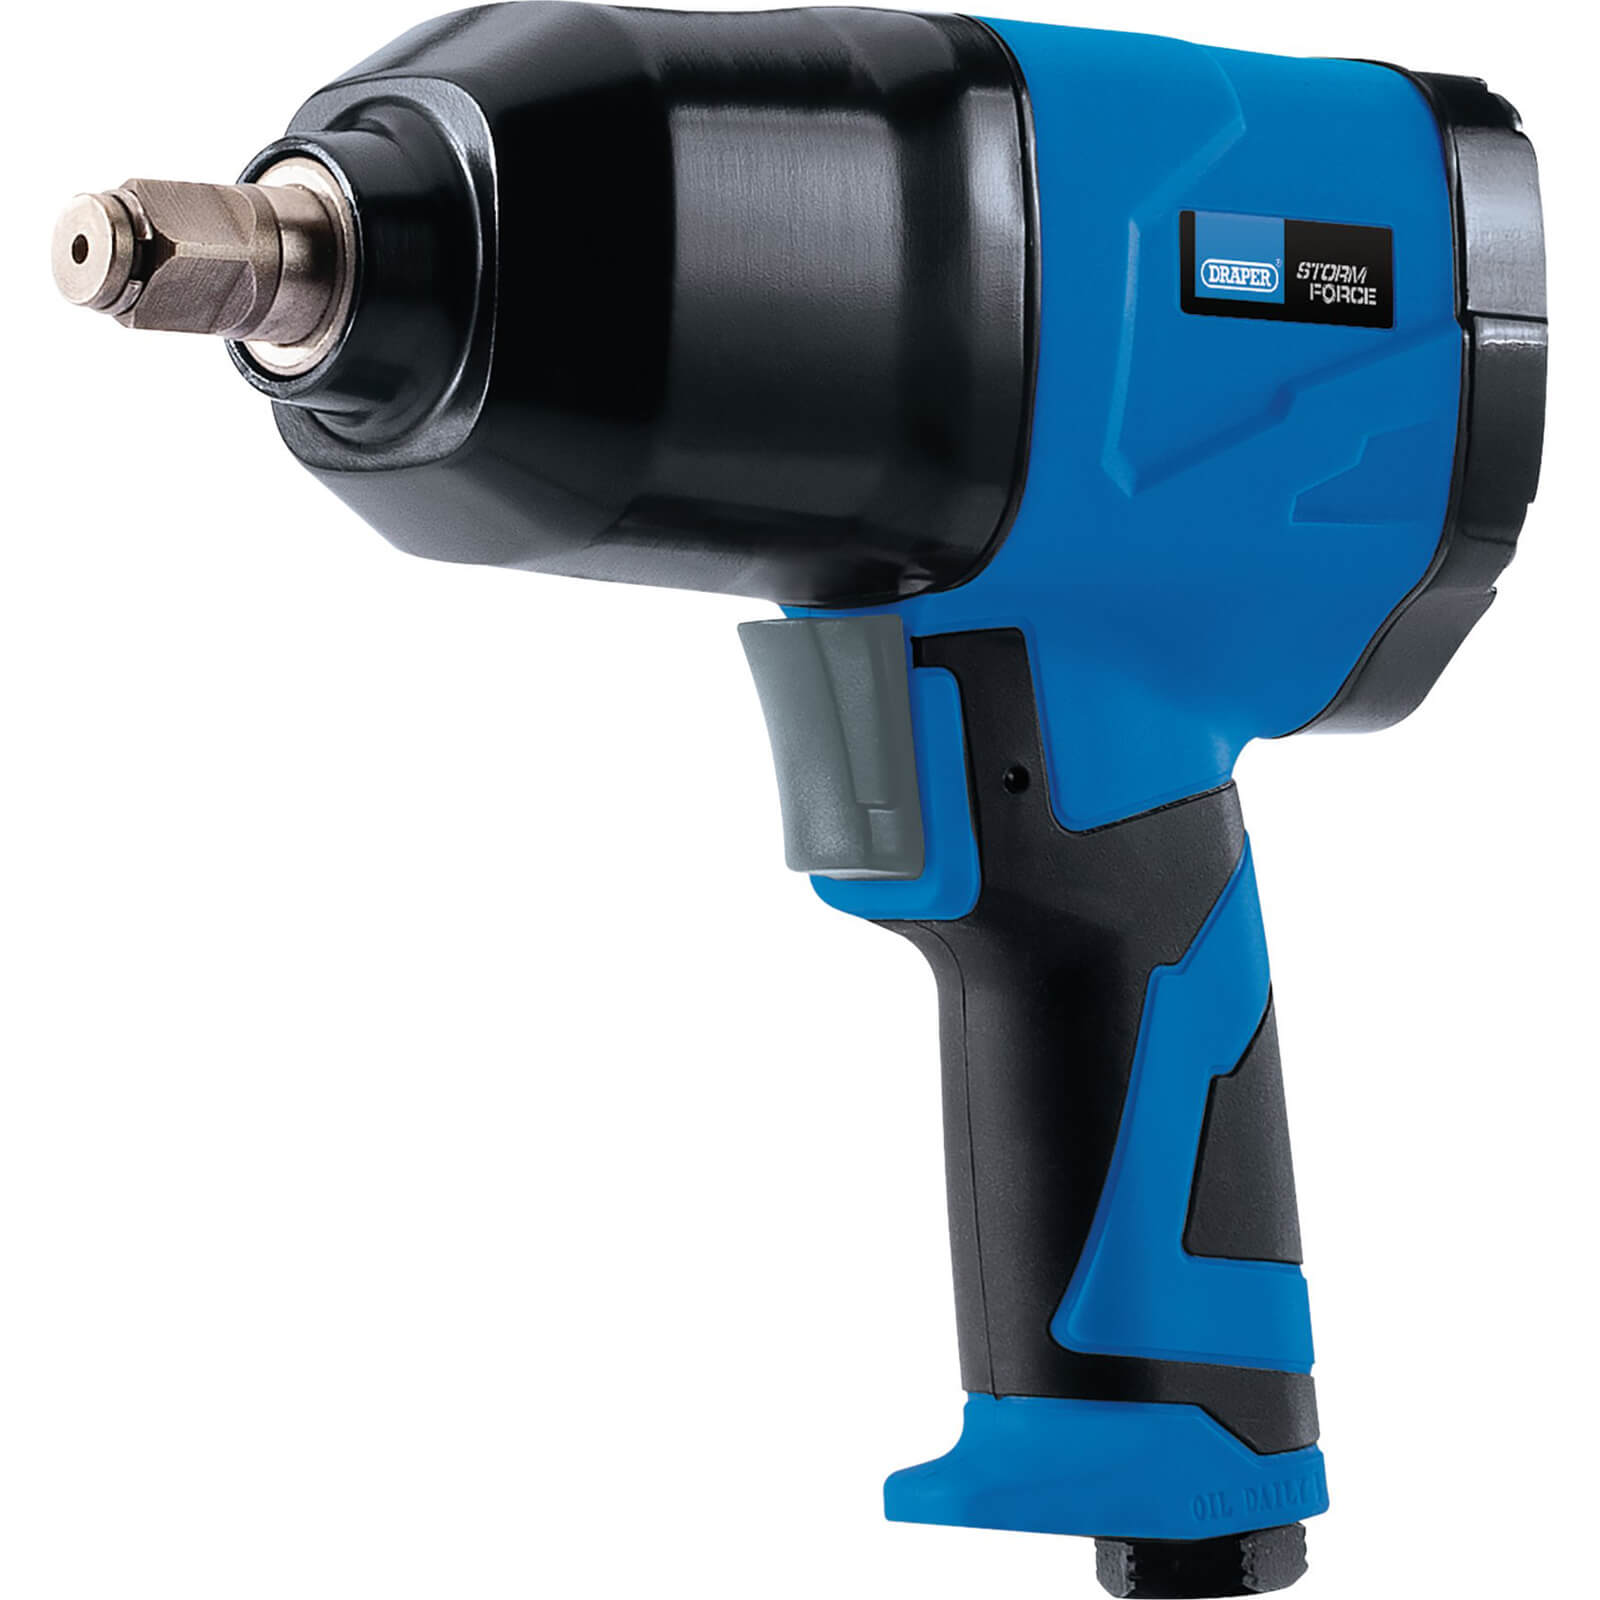 Photo of Draper Sfai12 Storm Force Air Impact Wrench 1/2